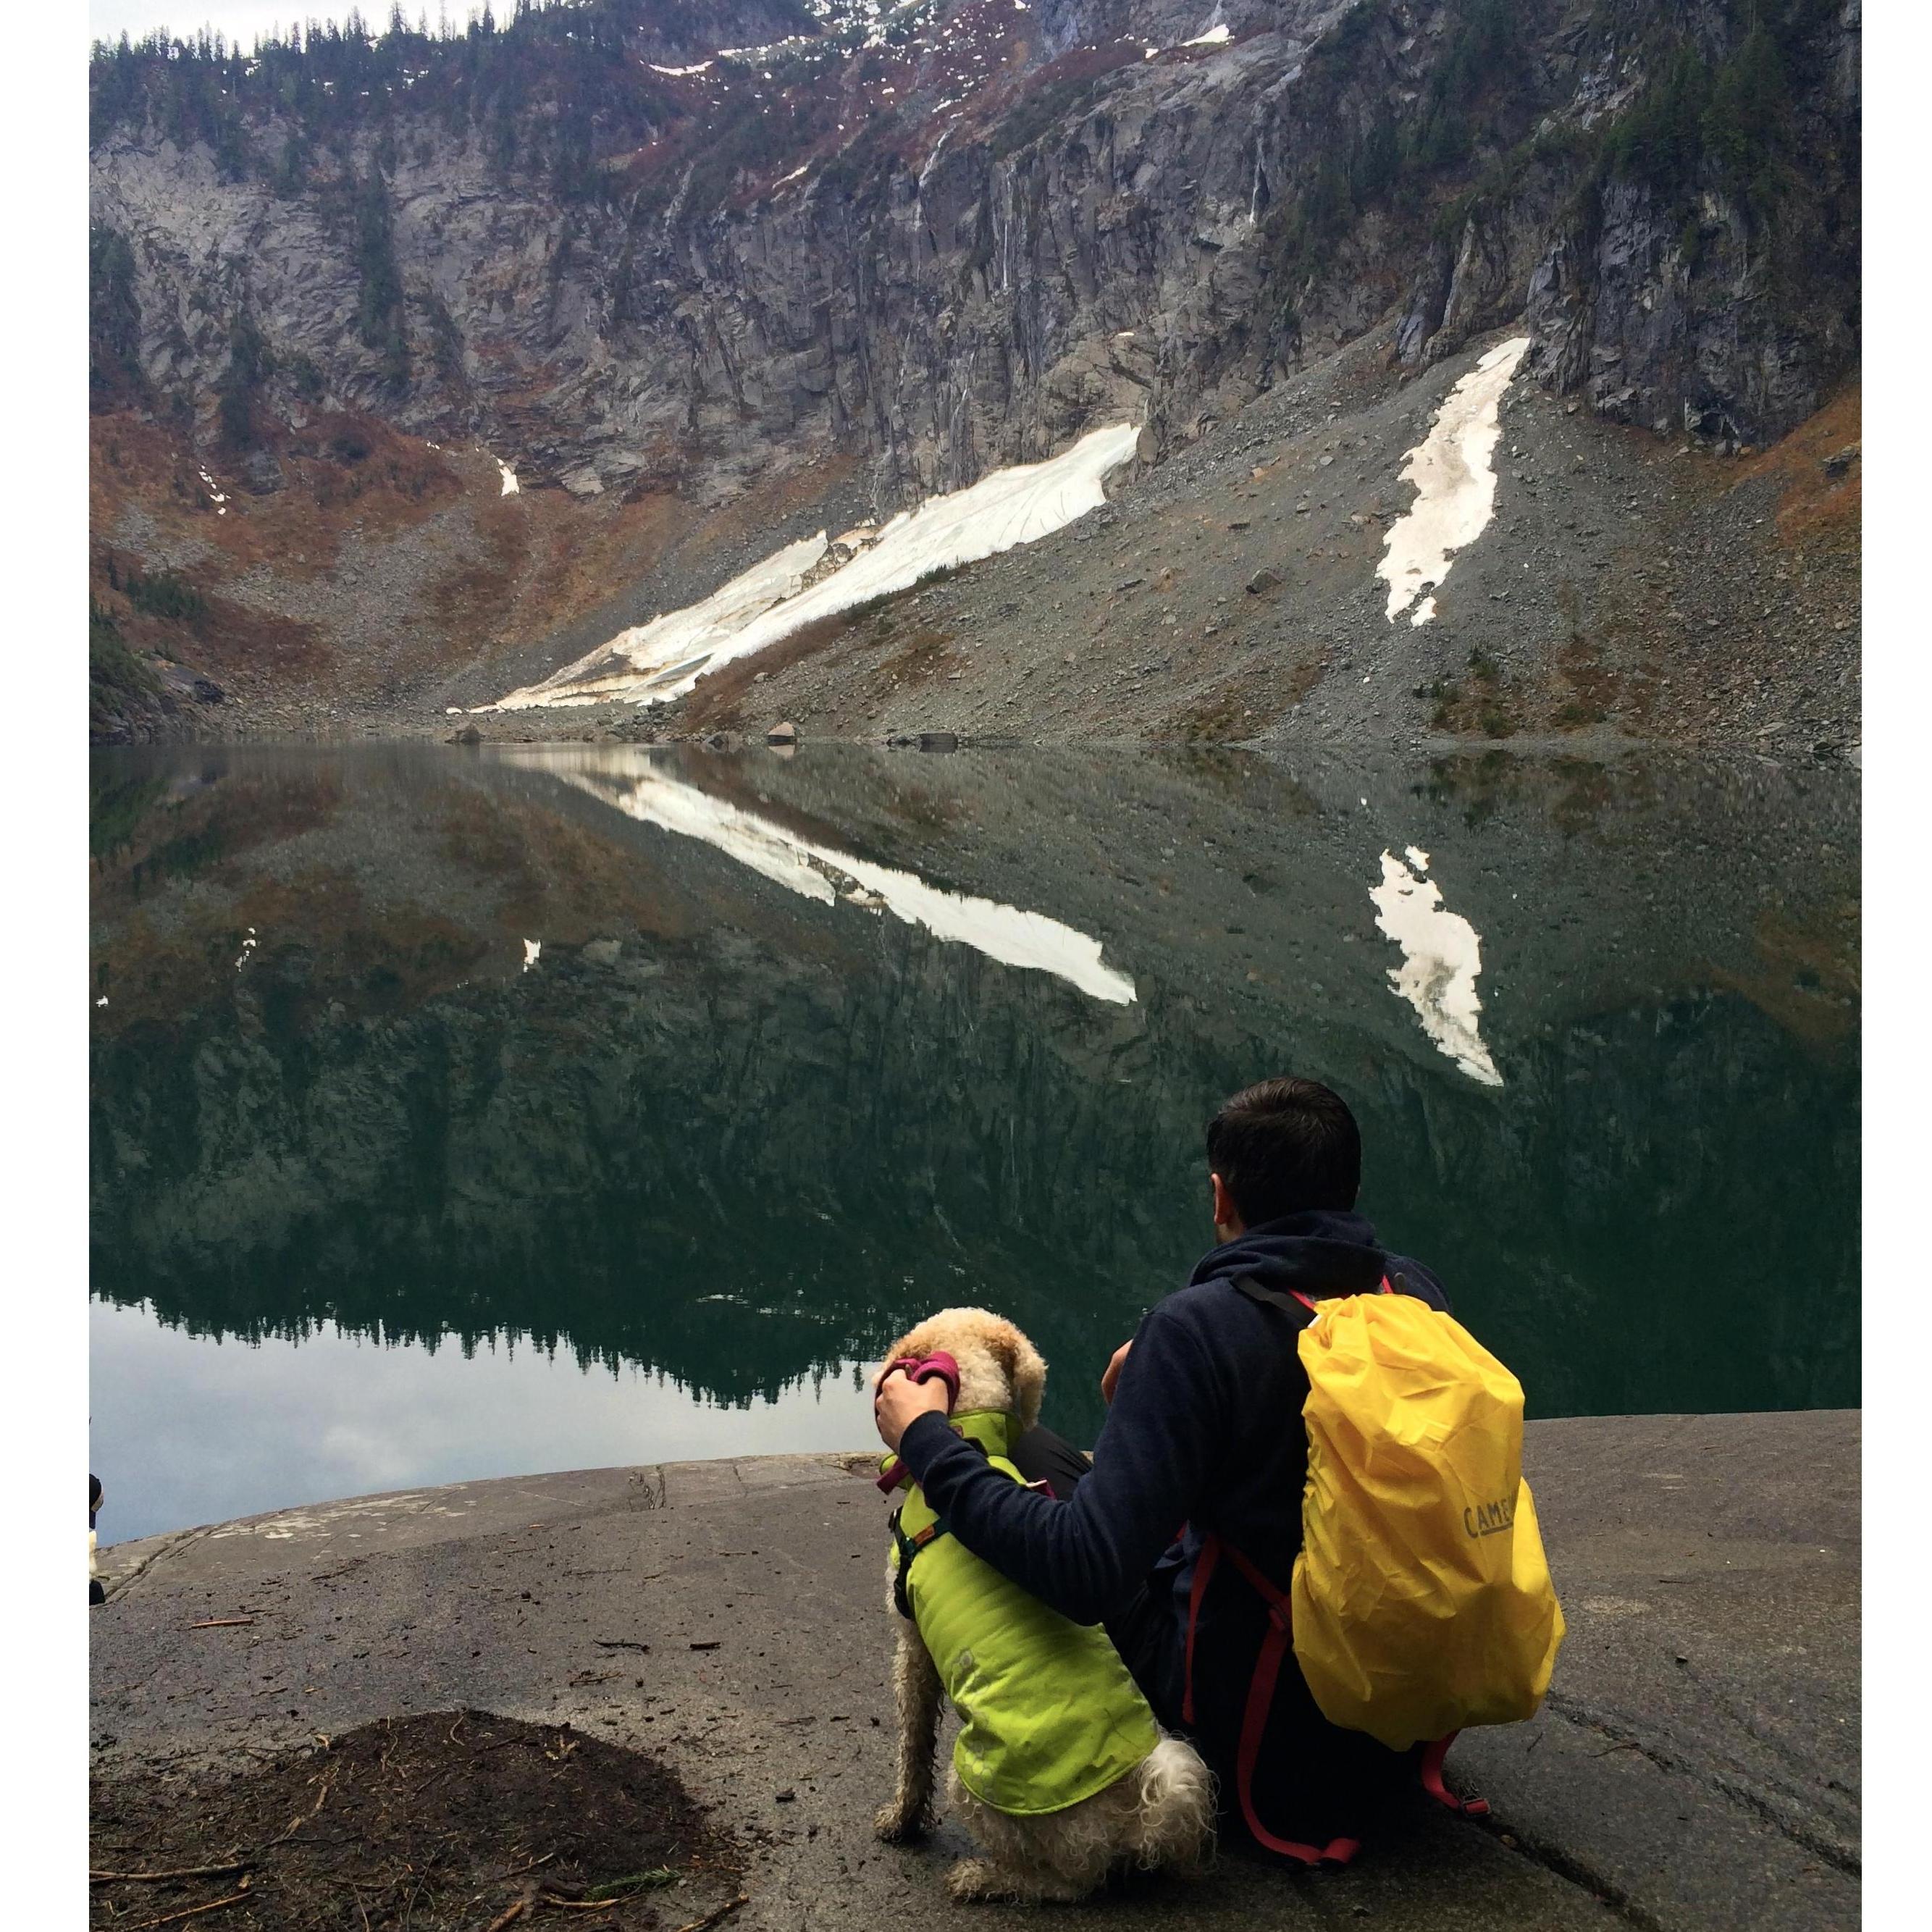 Henley, our favorite hiking partner at one of our favorite hiking spots, Lake Serene.